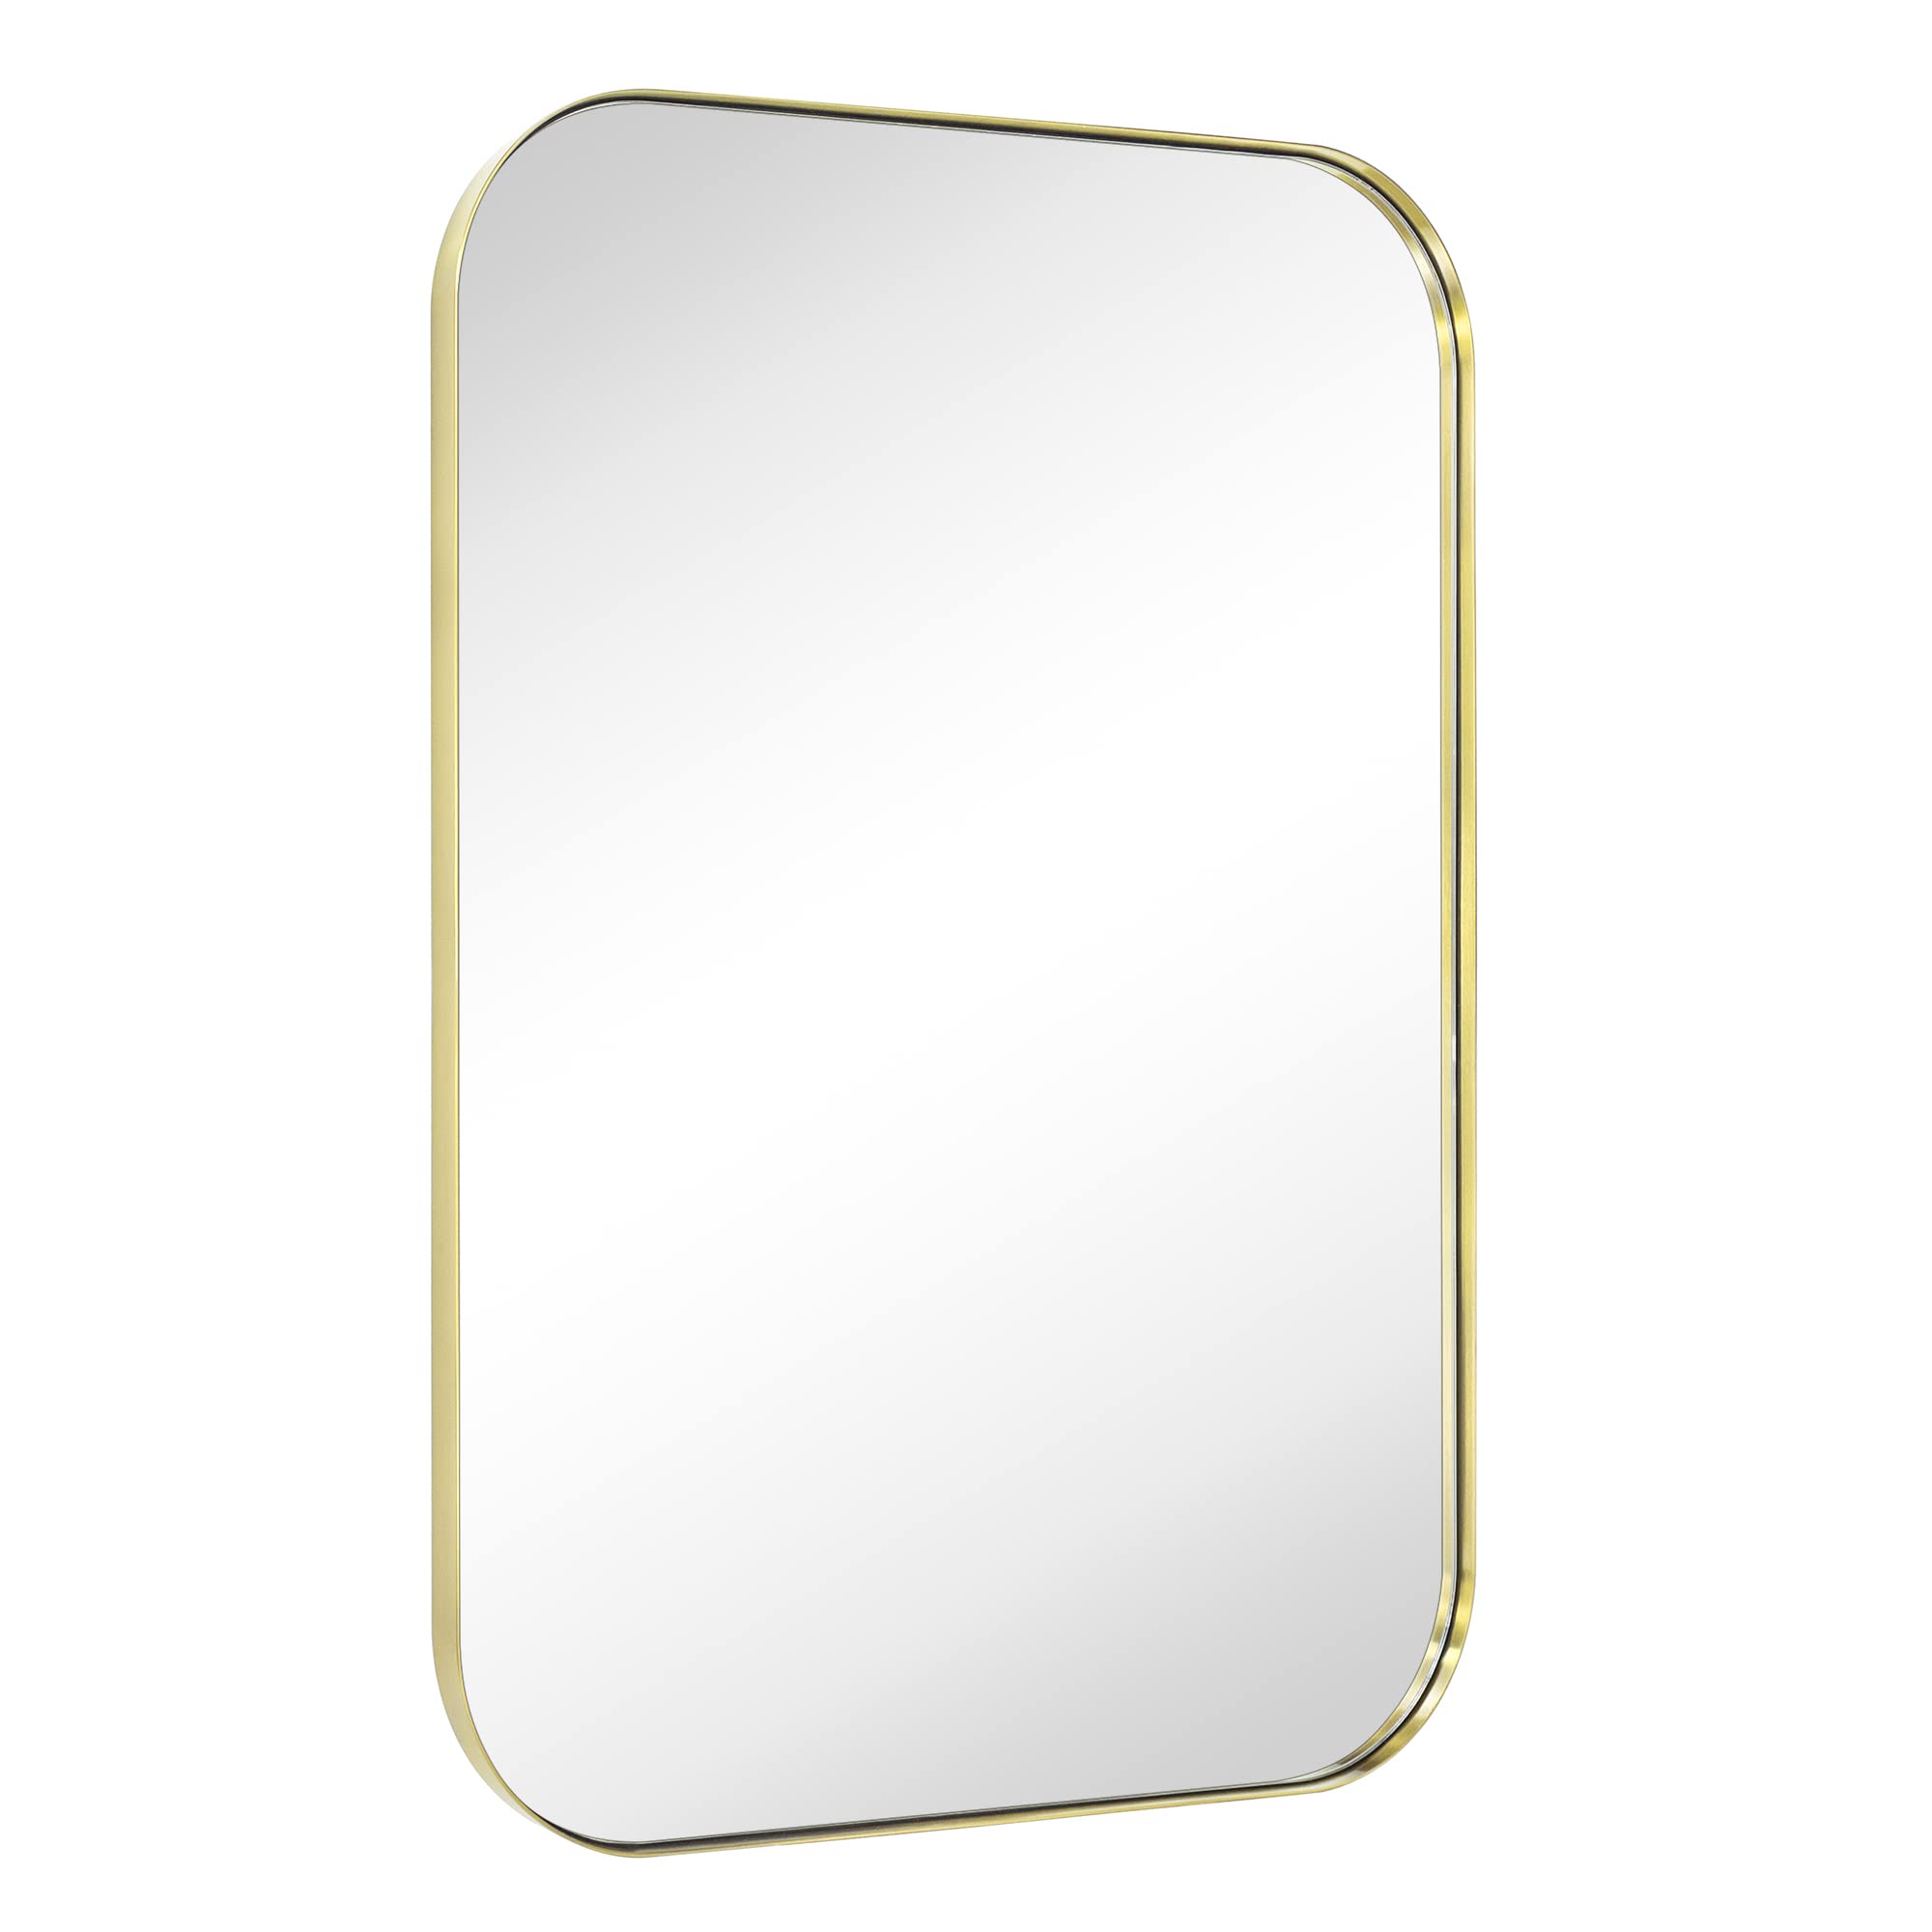 Mid-Century Modern Chic Metal Rounded Wall Mirrors-22x30-Brushed Gold